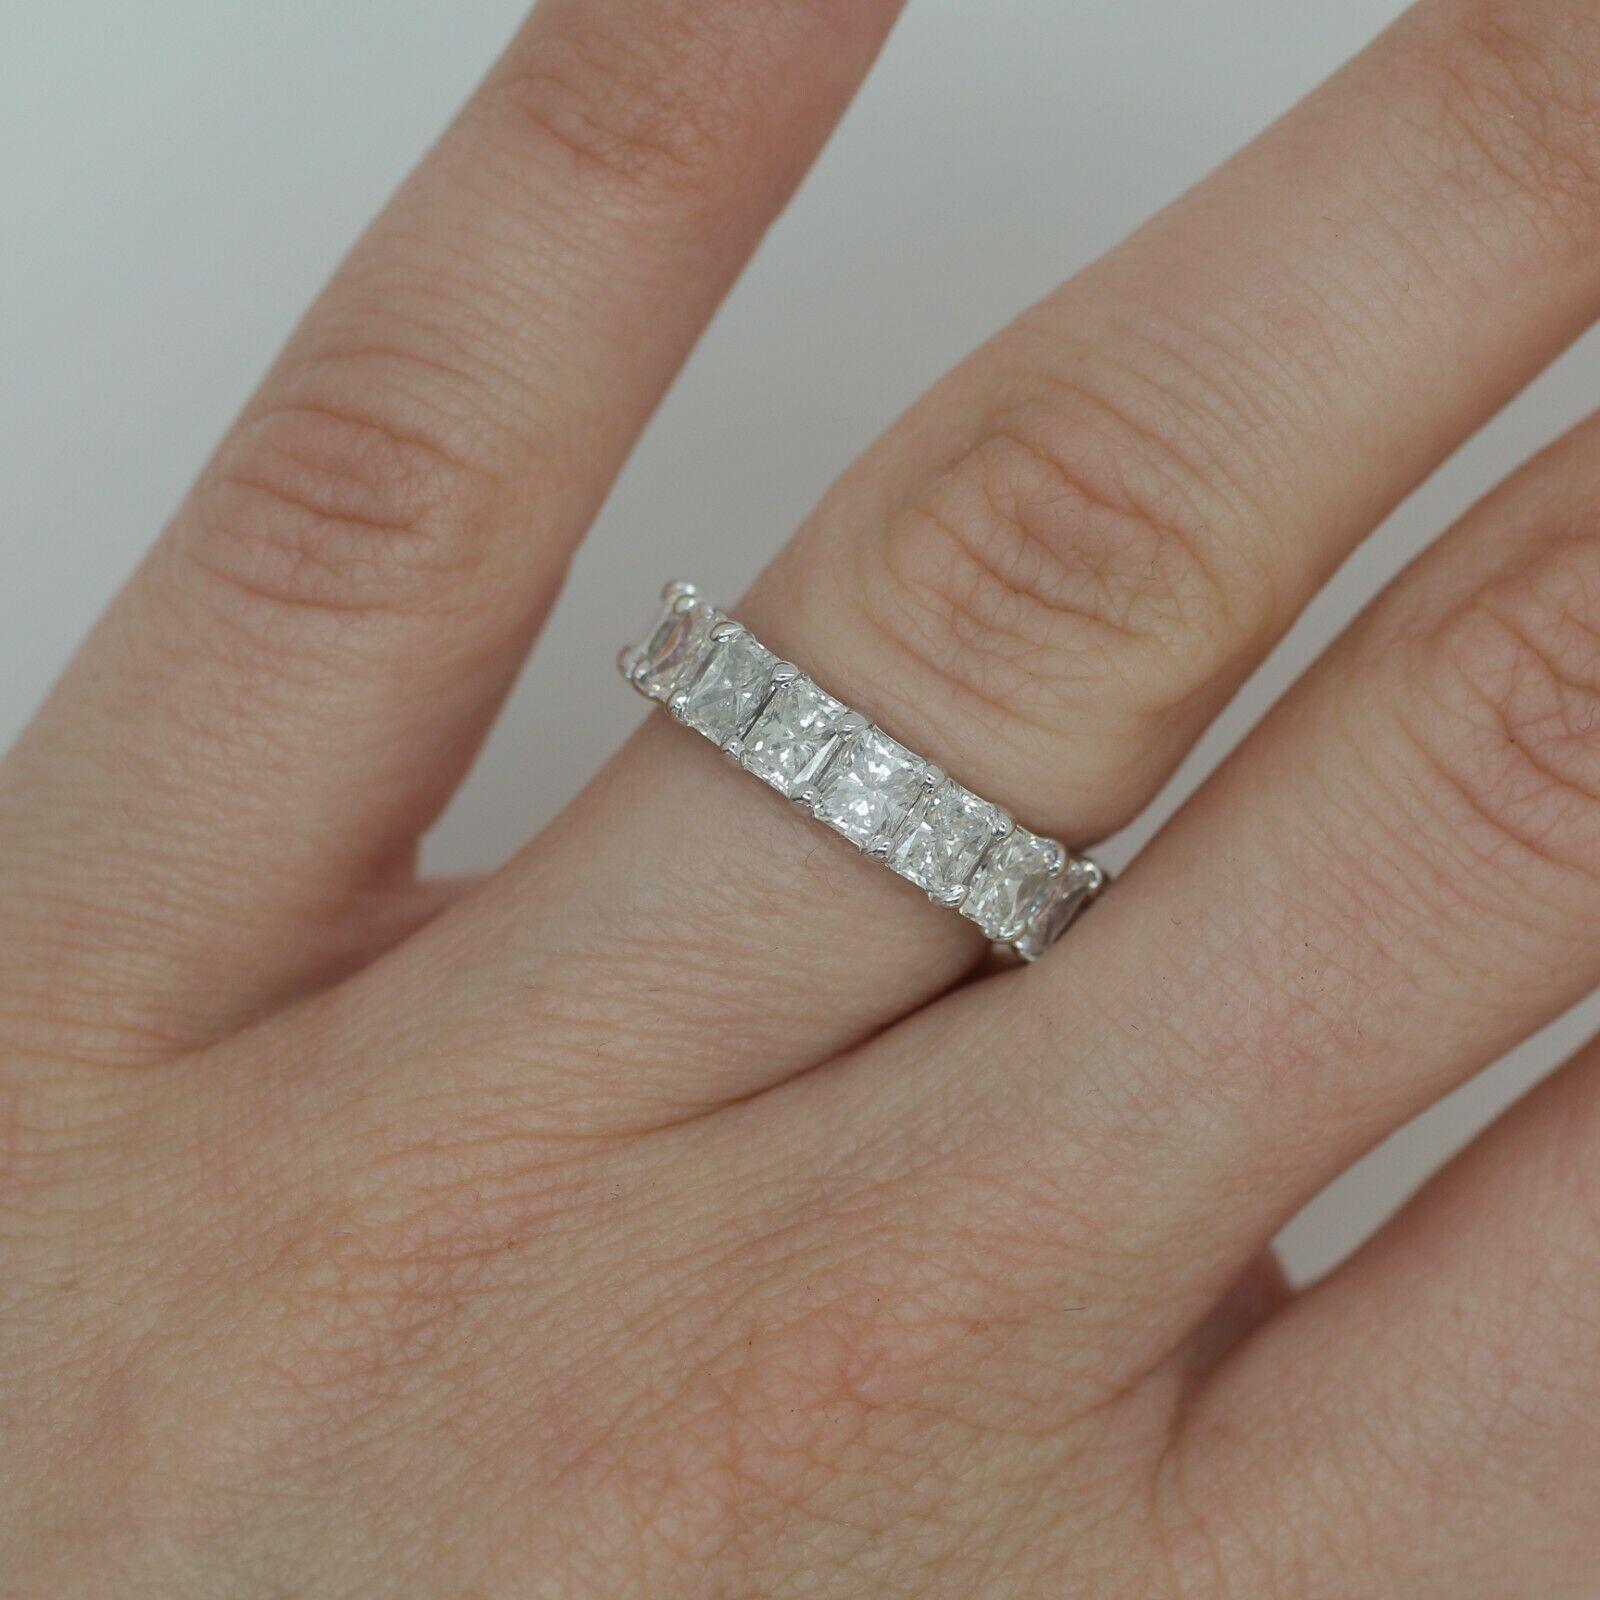 Radiant Cut Diamond 5.67cts. Eternity Ring Set in 14k White Gold For Sale 1